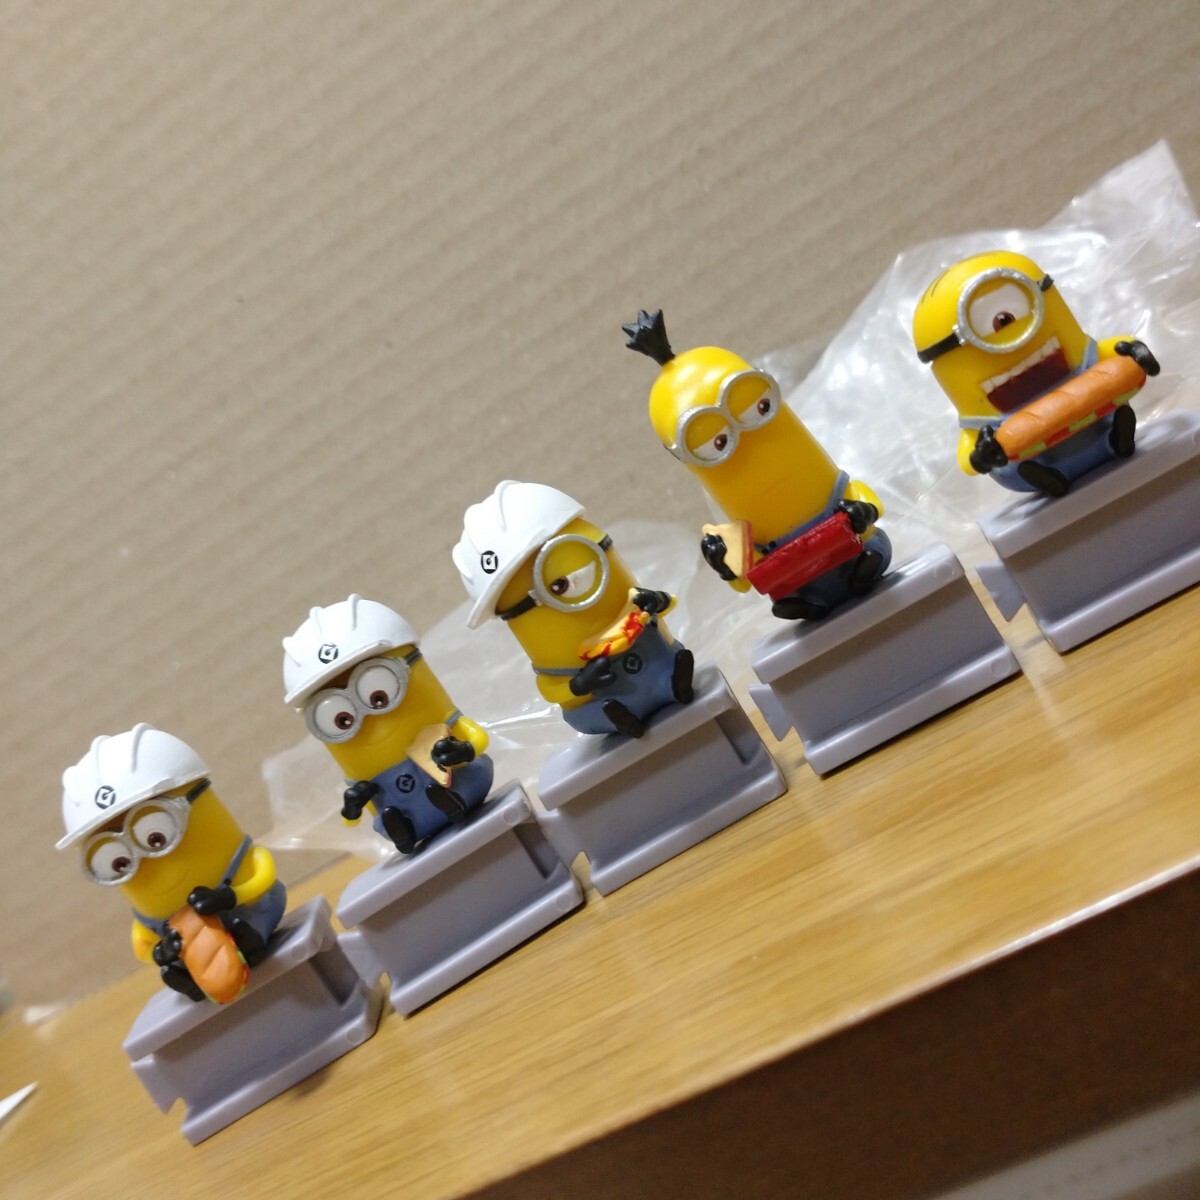 minions minion 工事現場 工事 工場 作業員 フィギュア コレクション ミニオンズ ミニオン パン ご飯 collection toy lunch time figureの画像1